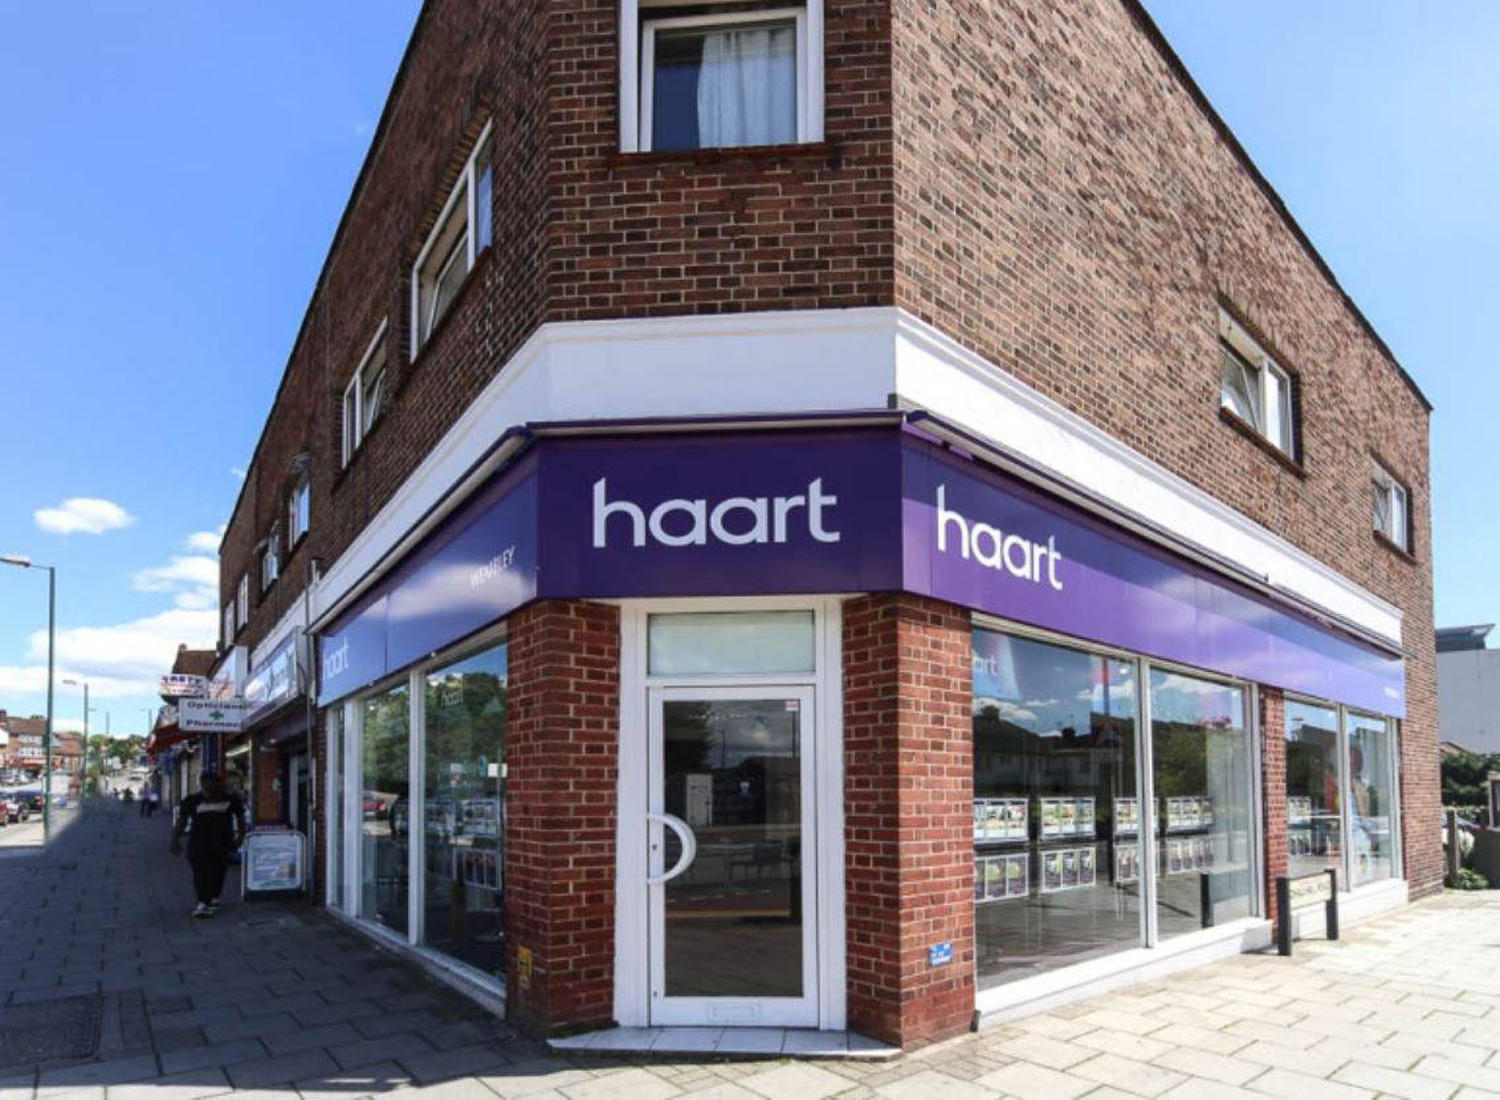 haart estate and lettings agents Wembley Wembley 020 4512 8378